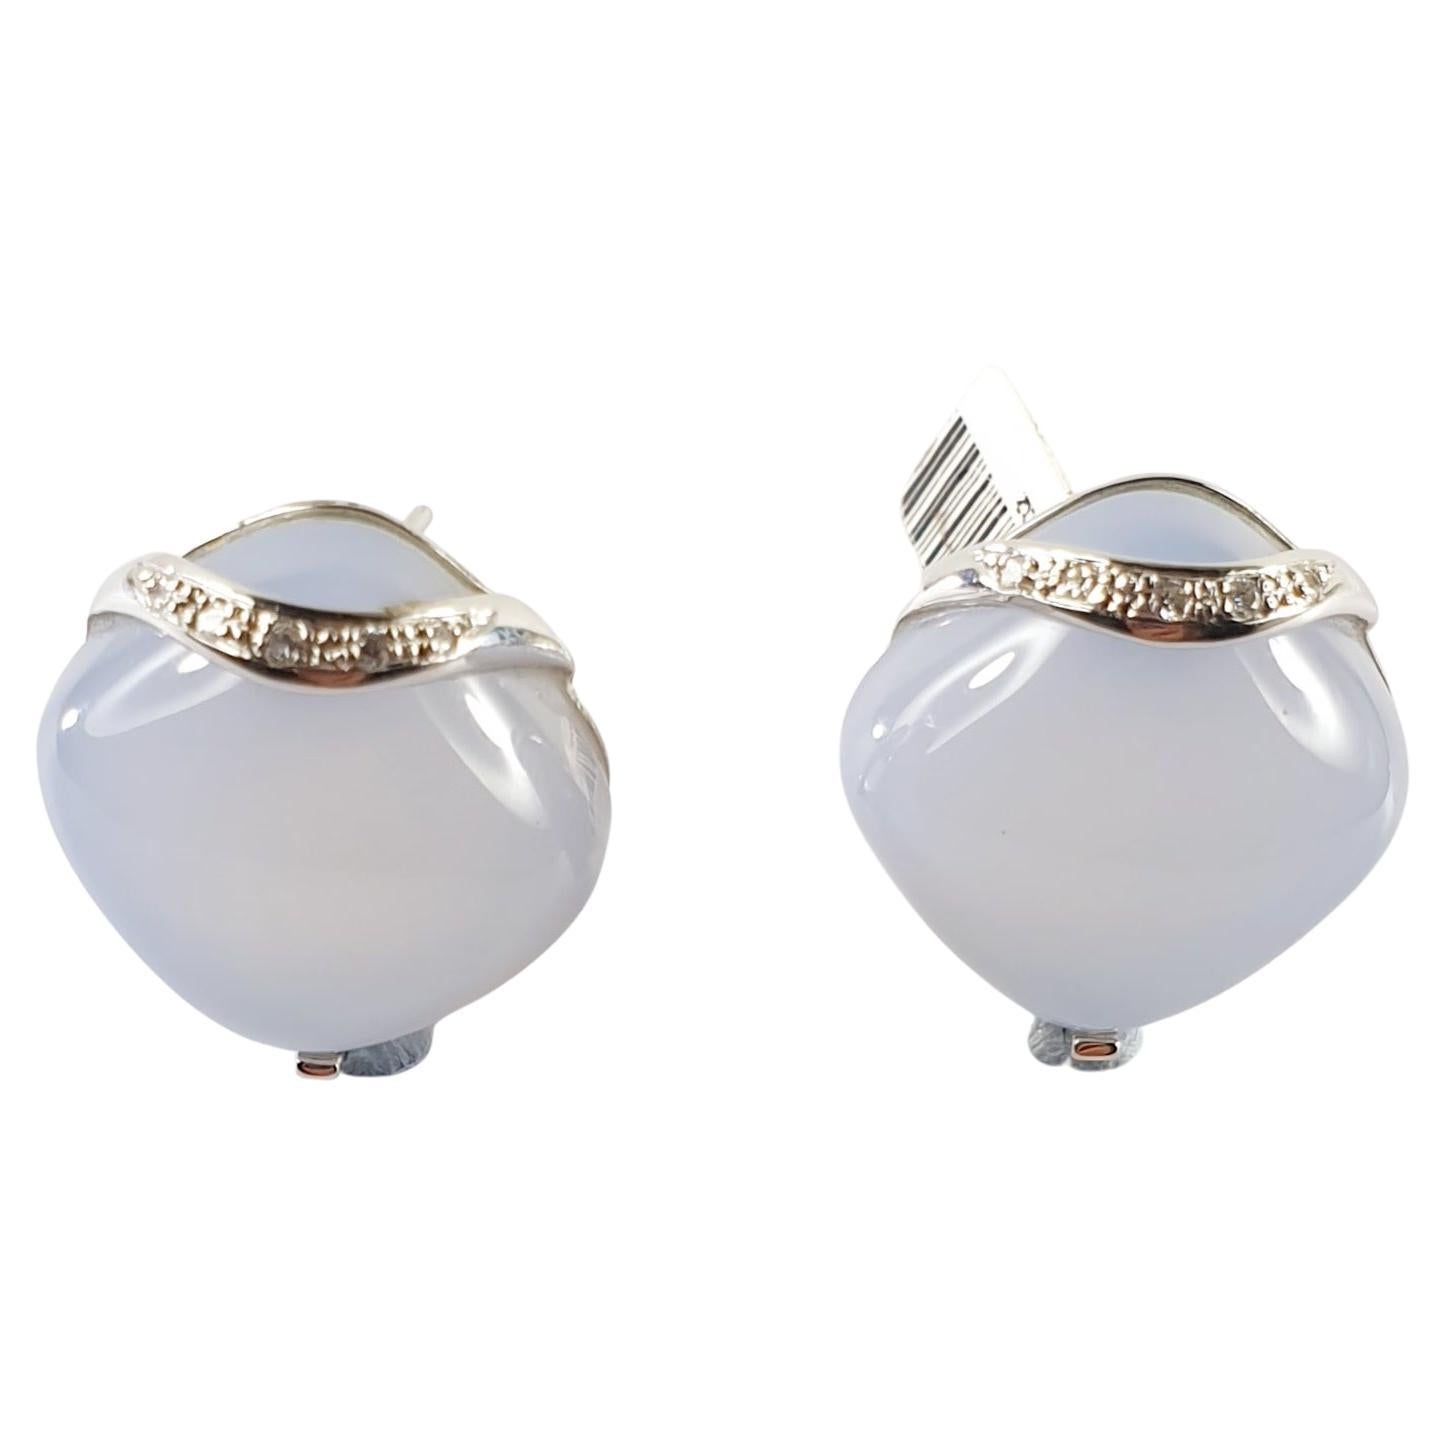 Irama Pradera is a Young designer from Spain that searches always for the best gems and combines classic with contemporary mounting and styles. 
Sleekly crafted in 18K white gold these casual and sportive earrings  give a chic, high-style sparkler,